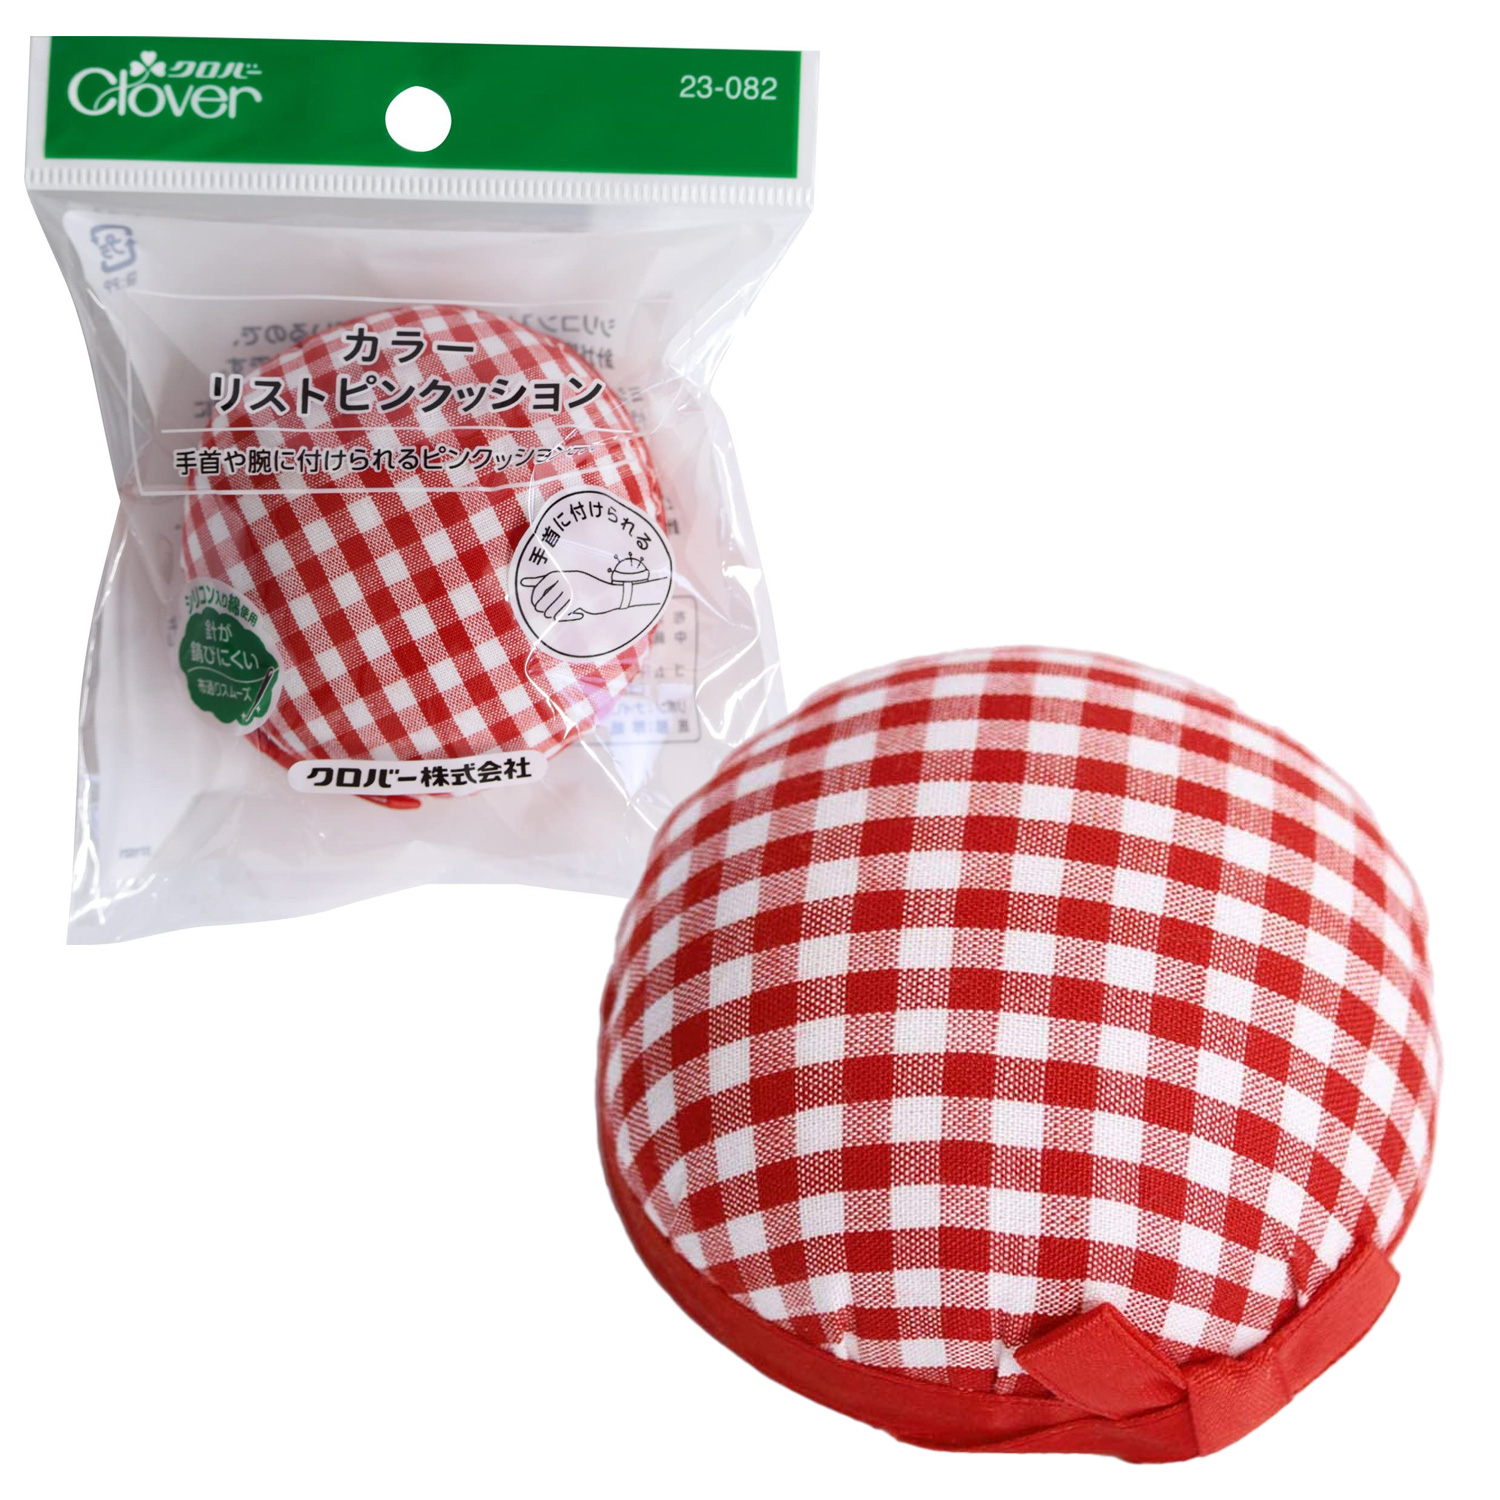 CL23-082 Clover Colorist Pin Cushion red (pcs)